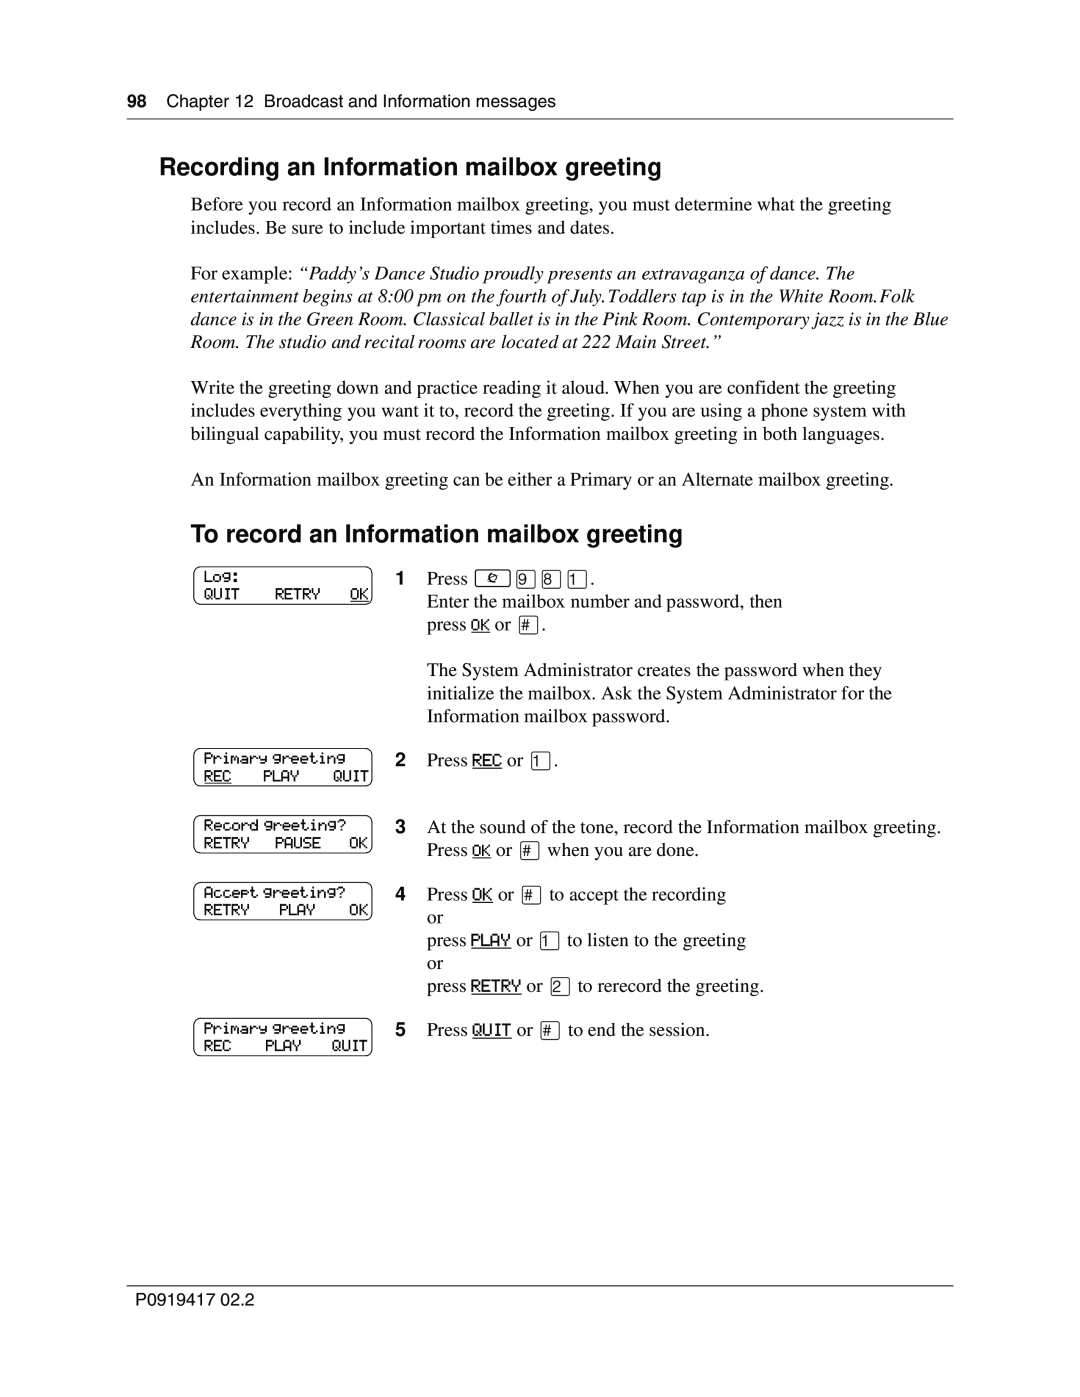 Nortel Networks CallPilot manual Recording an Information mailbox greeting, To record an Information mailbox greeting 